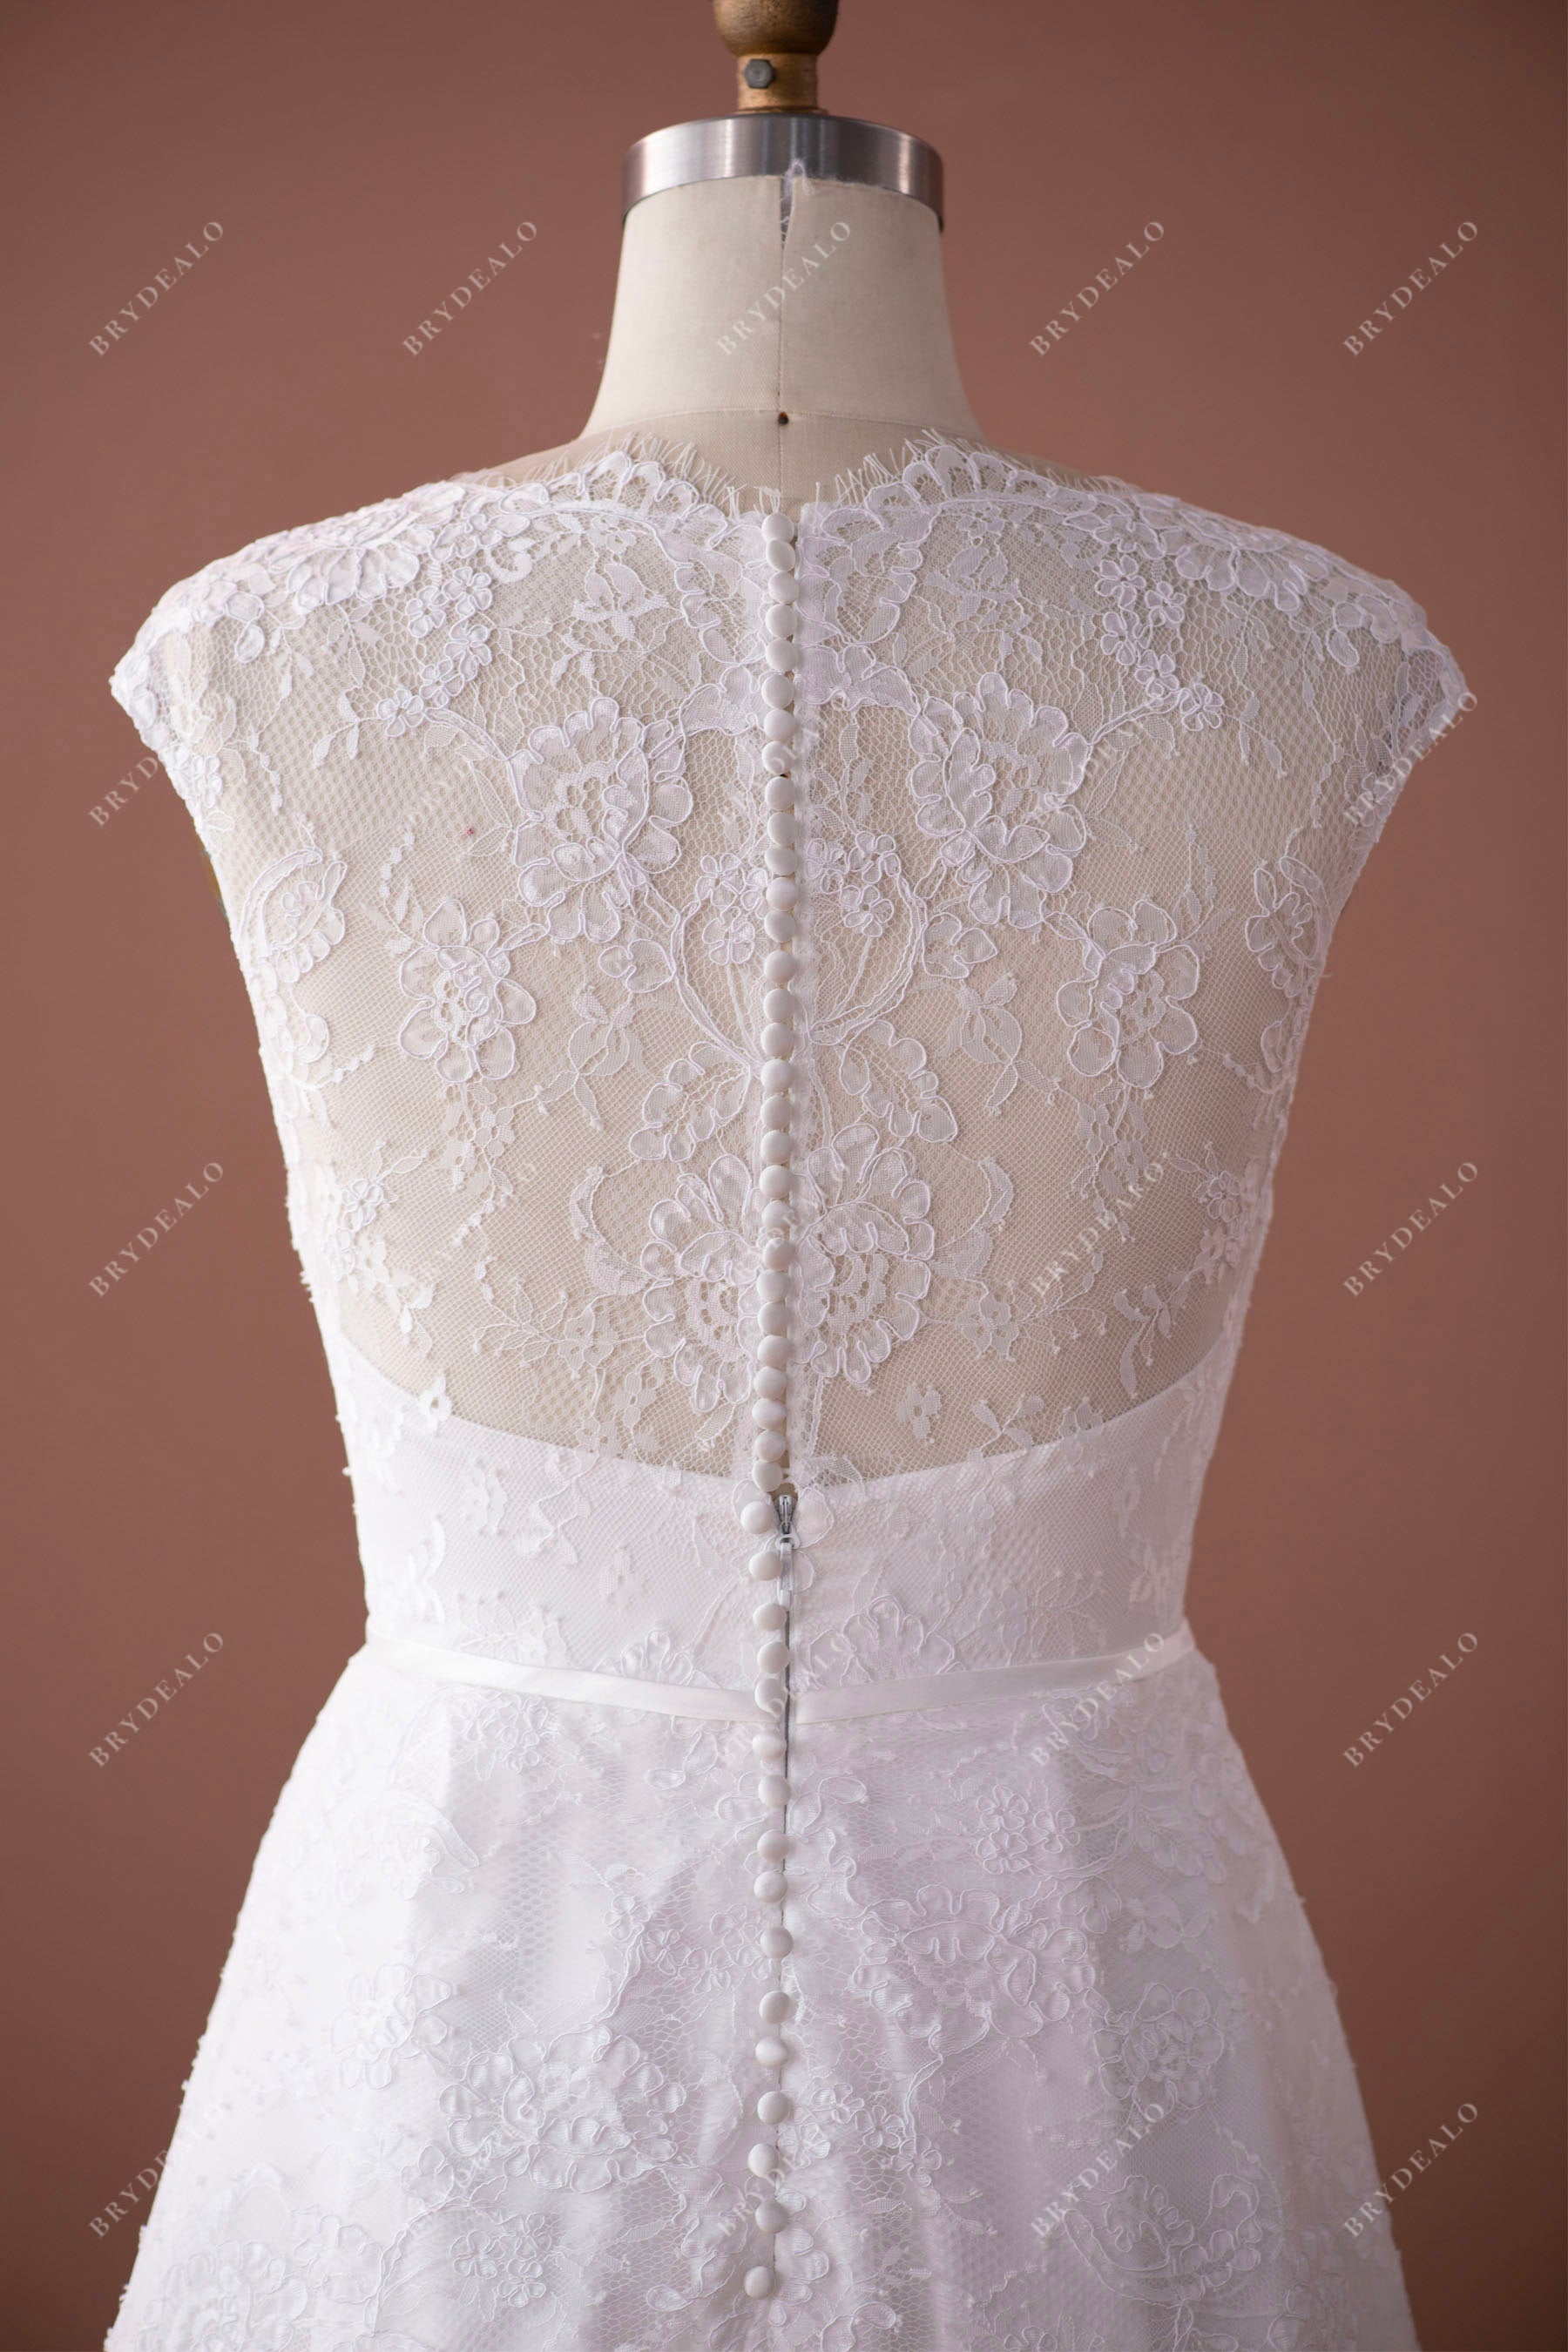 sheer lace back scalloped high neck back wedding gown